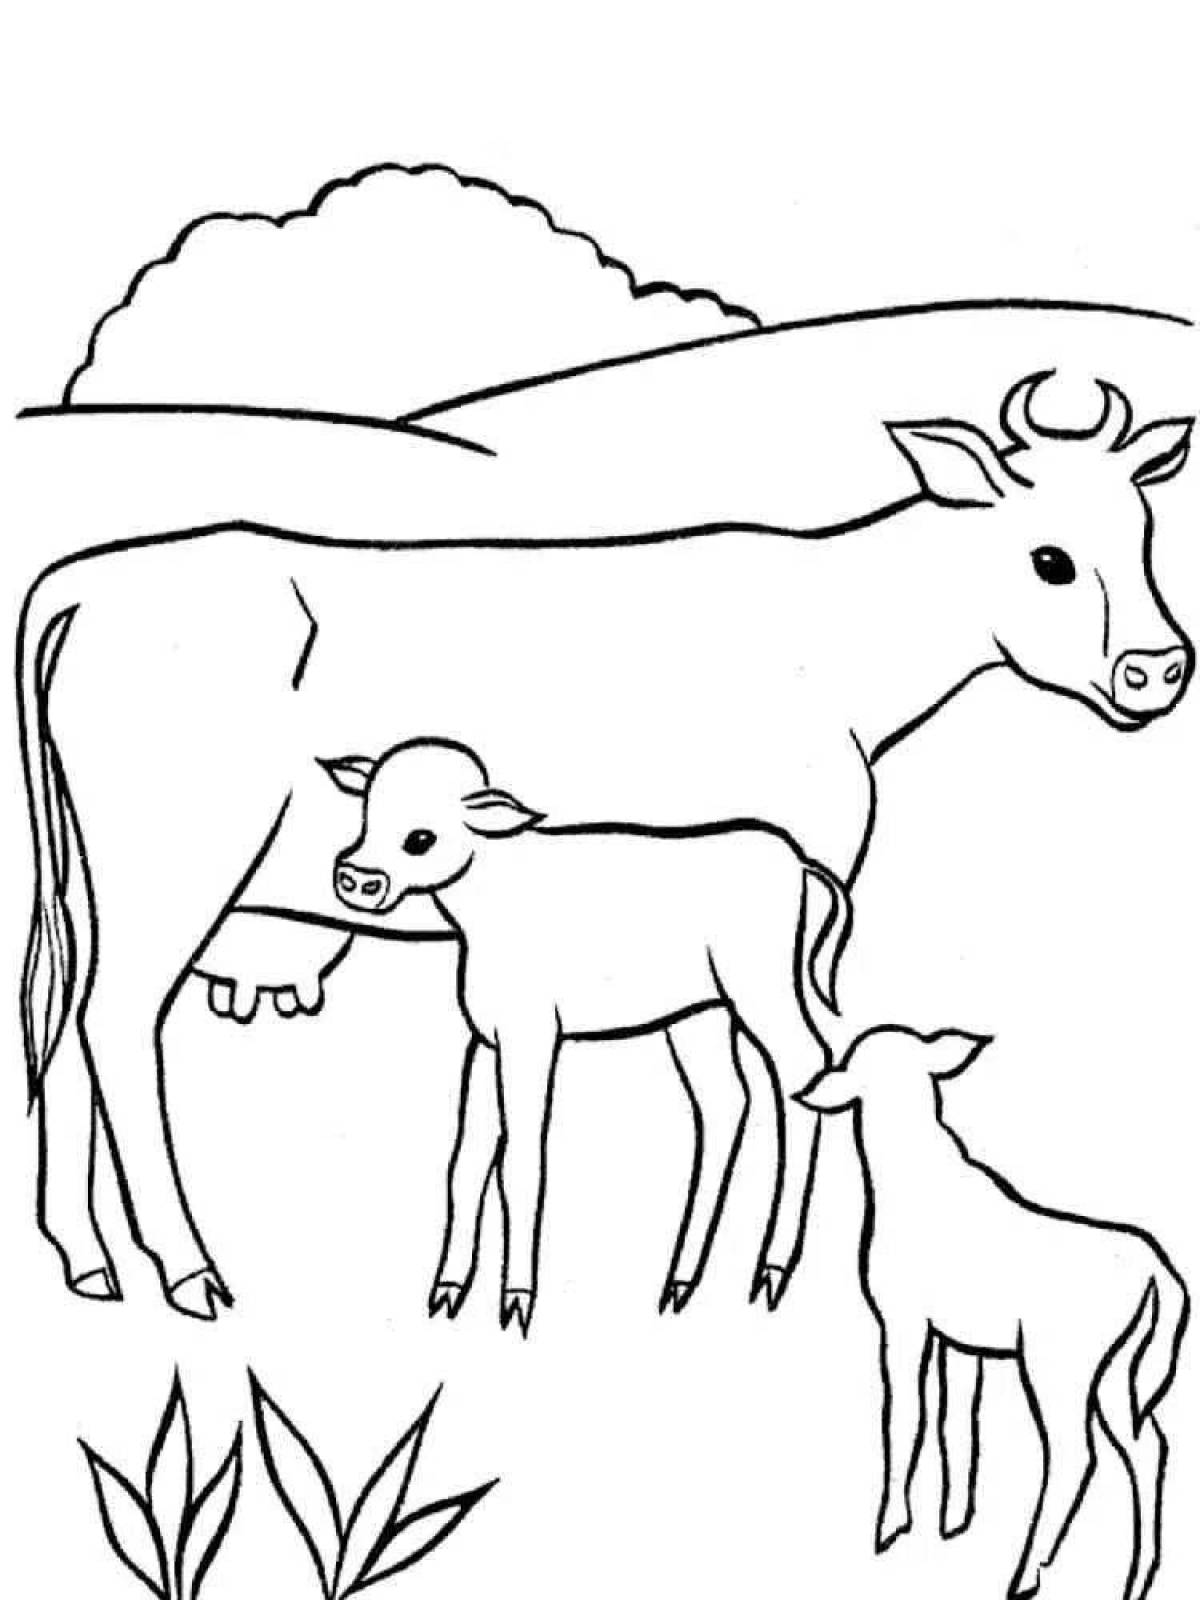 Animated cow and calf coloring page